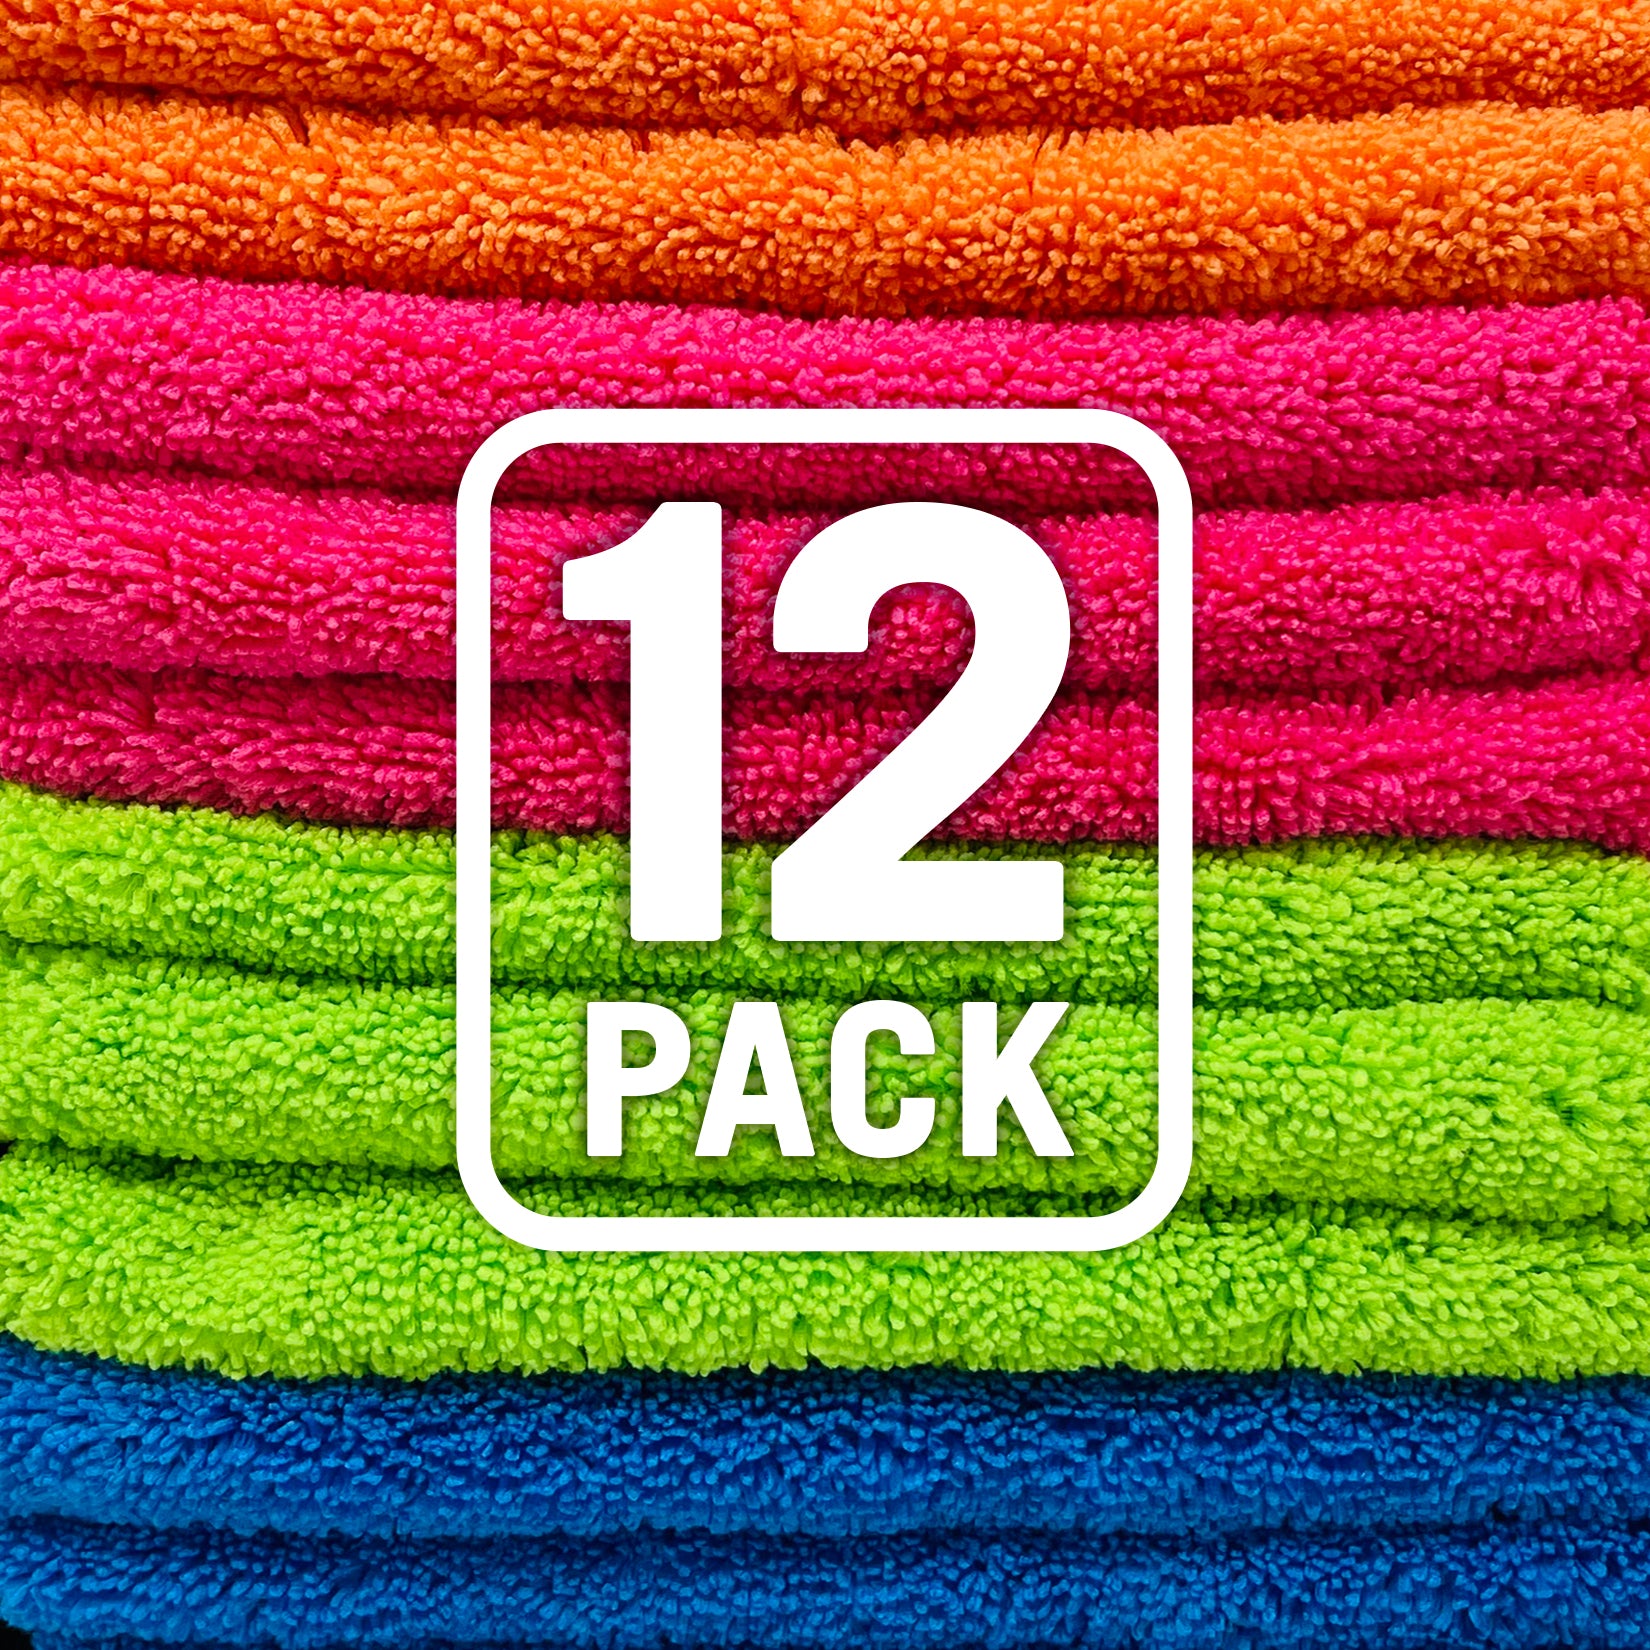 12x12 400GSM Microfiber Cleaning Cloth 6PCS 3 Colors(Green Blue Orange)  Reusable Wash Clothes for House Boat Car Window Cleaner 2PCS Screen Cloth  as Gift